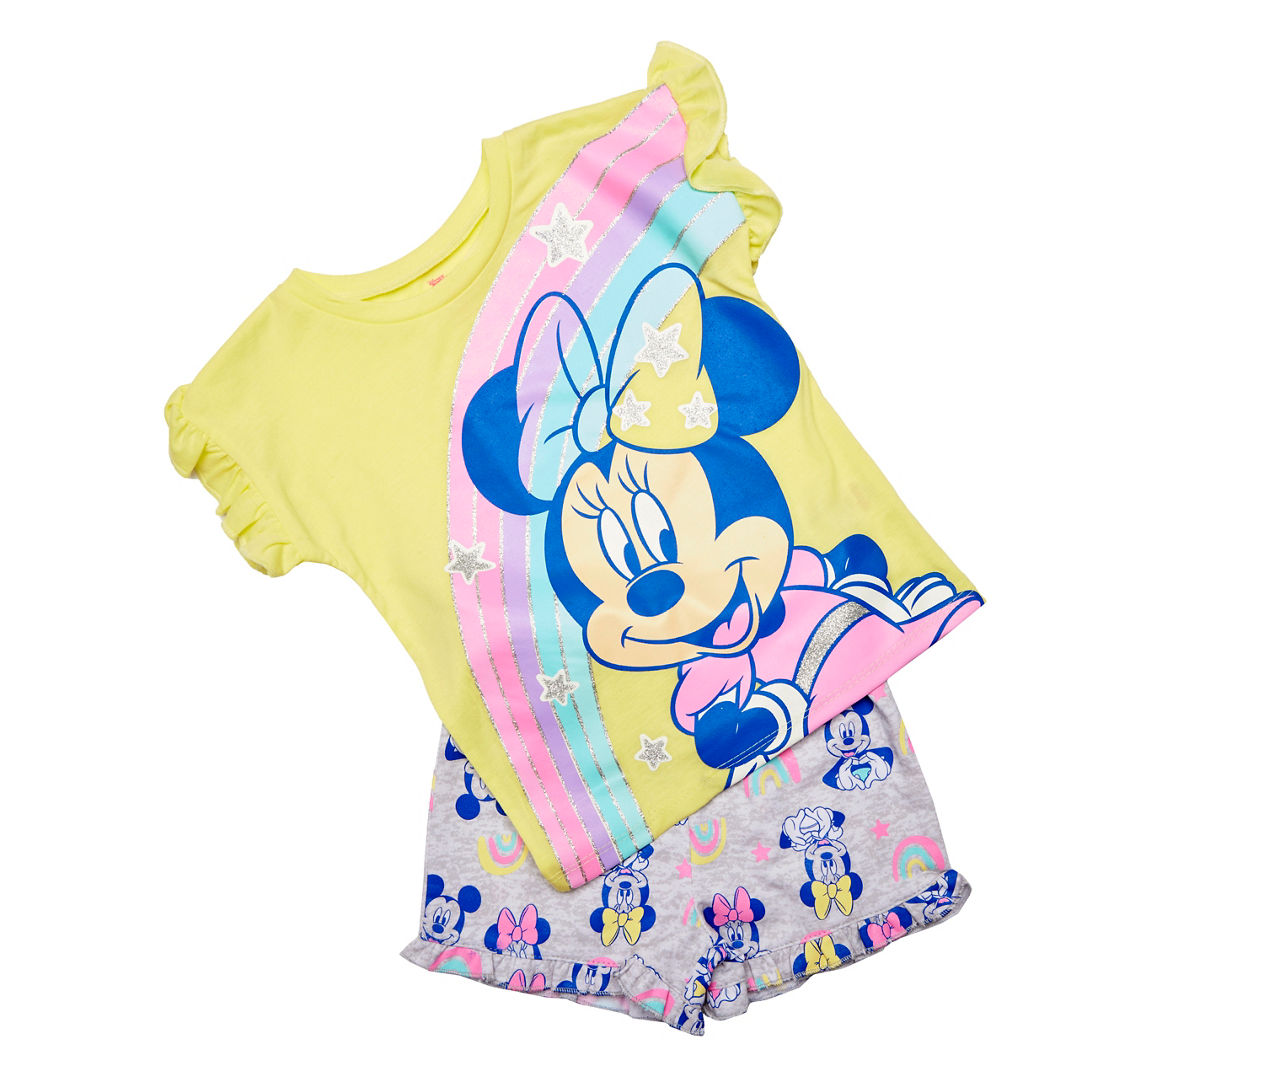 Toddler 3T Minnie Mouse Yellow Top & Terry Shorts